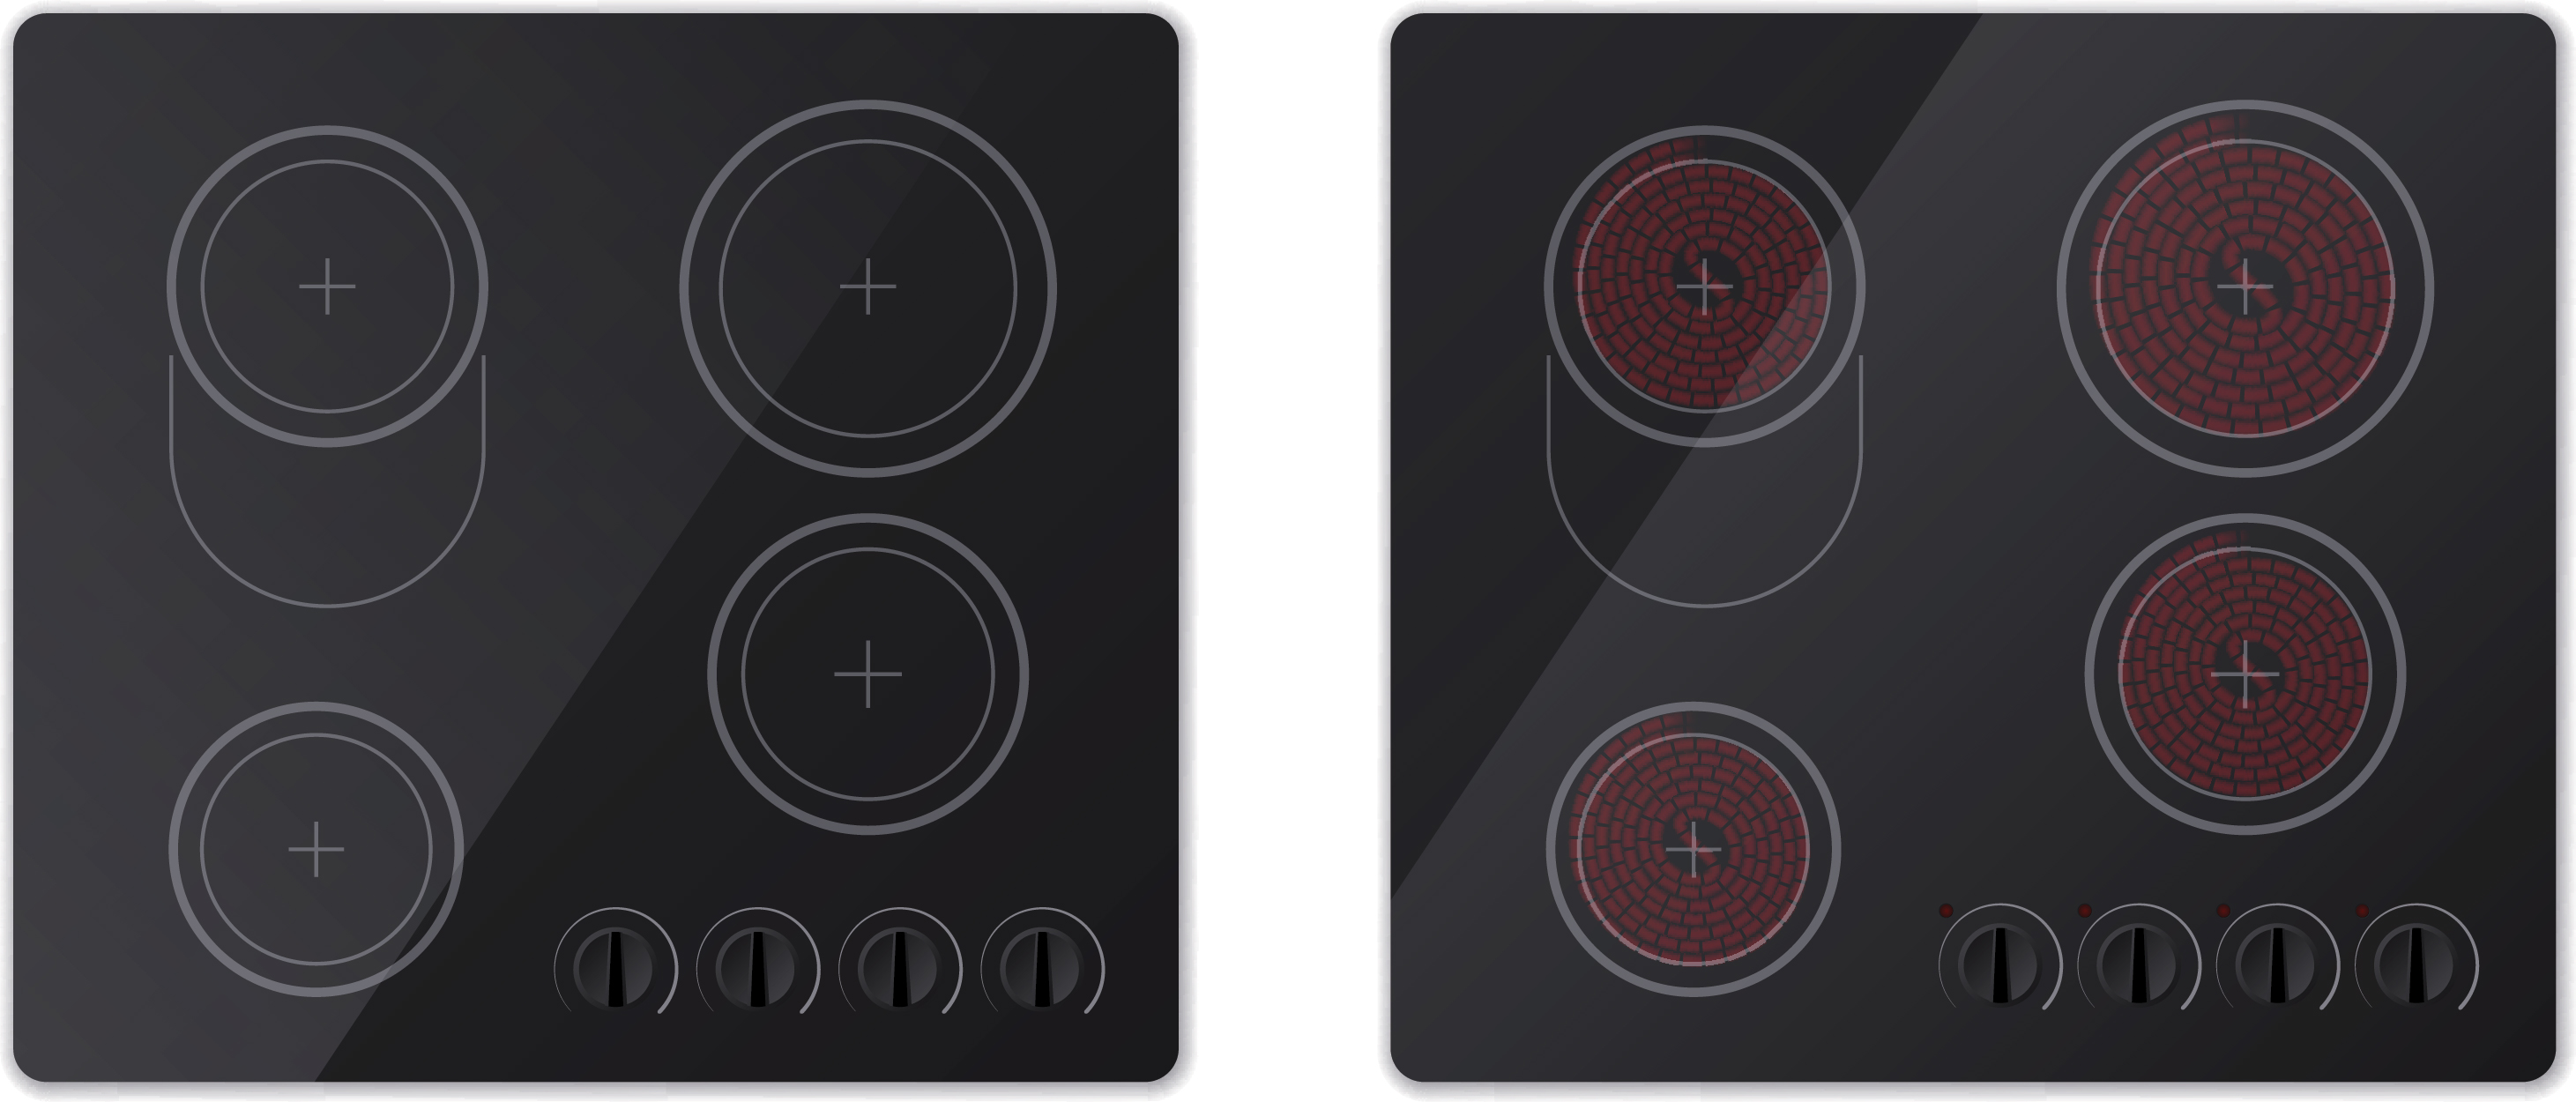 Example of a ceramic hob and an induction hob